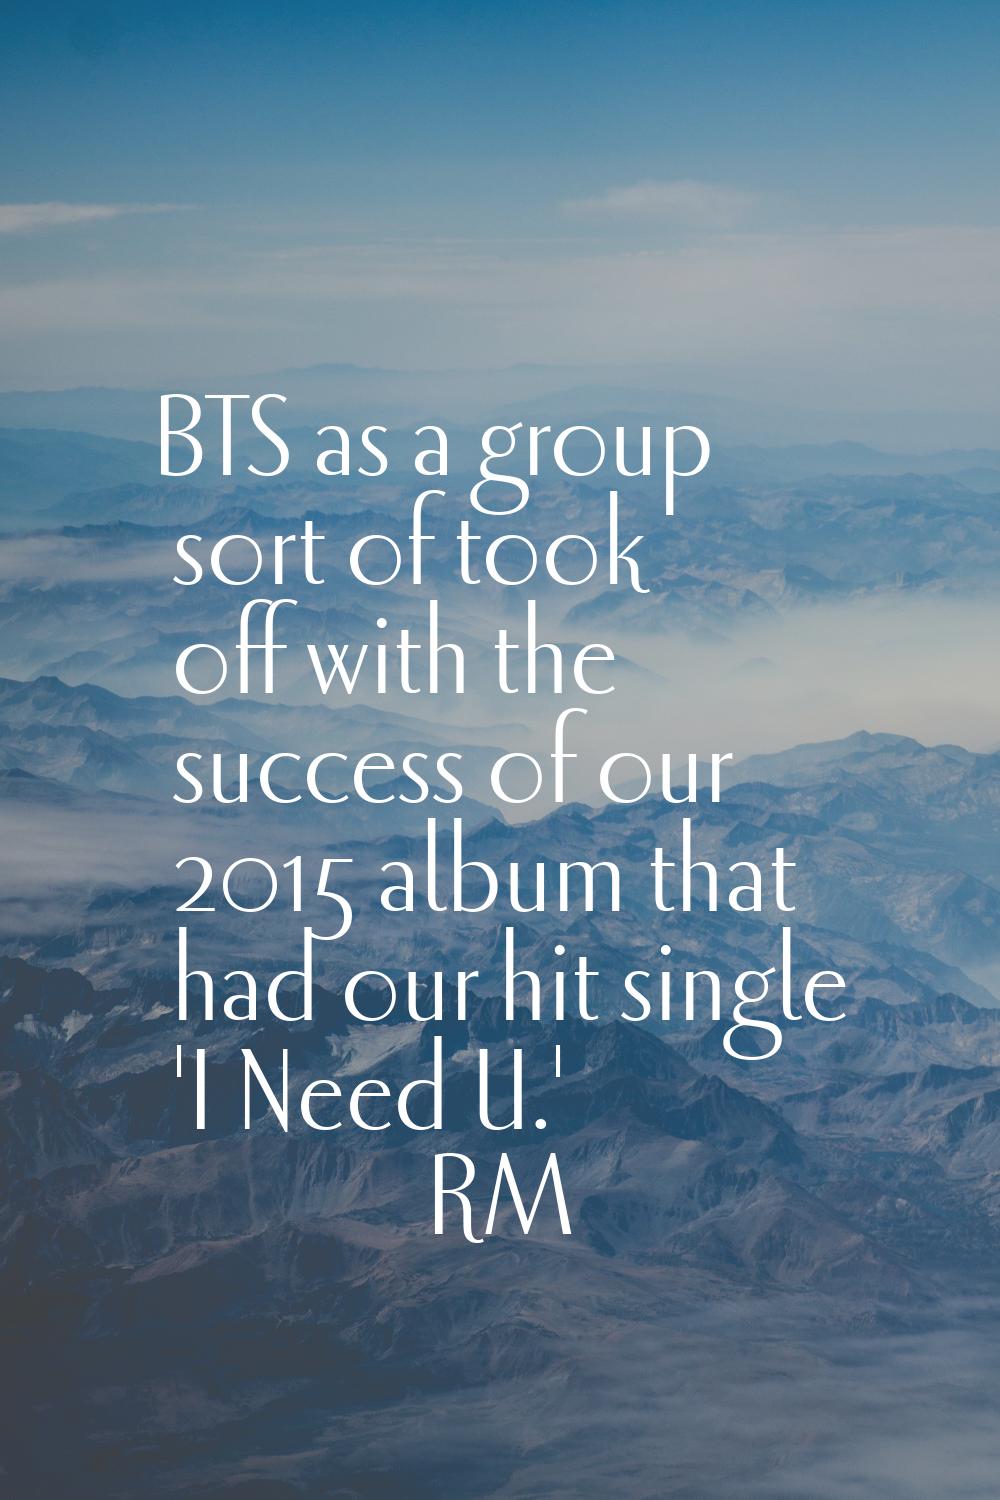 BTS as a group sort of took off with the success of our 2015 album that had our hit single 'I Need 